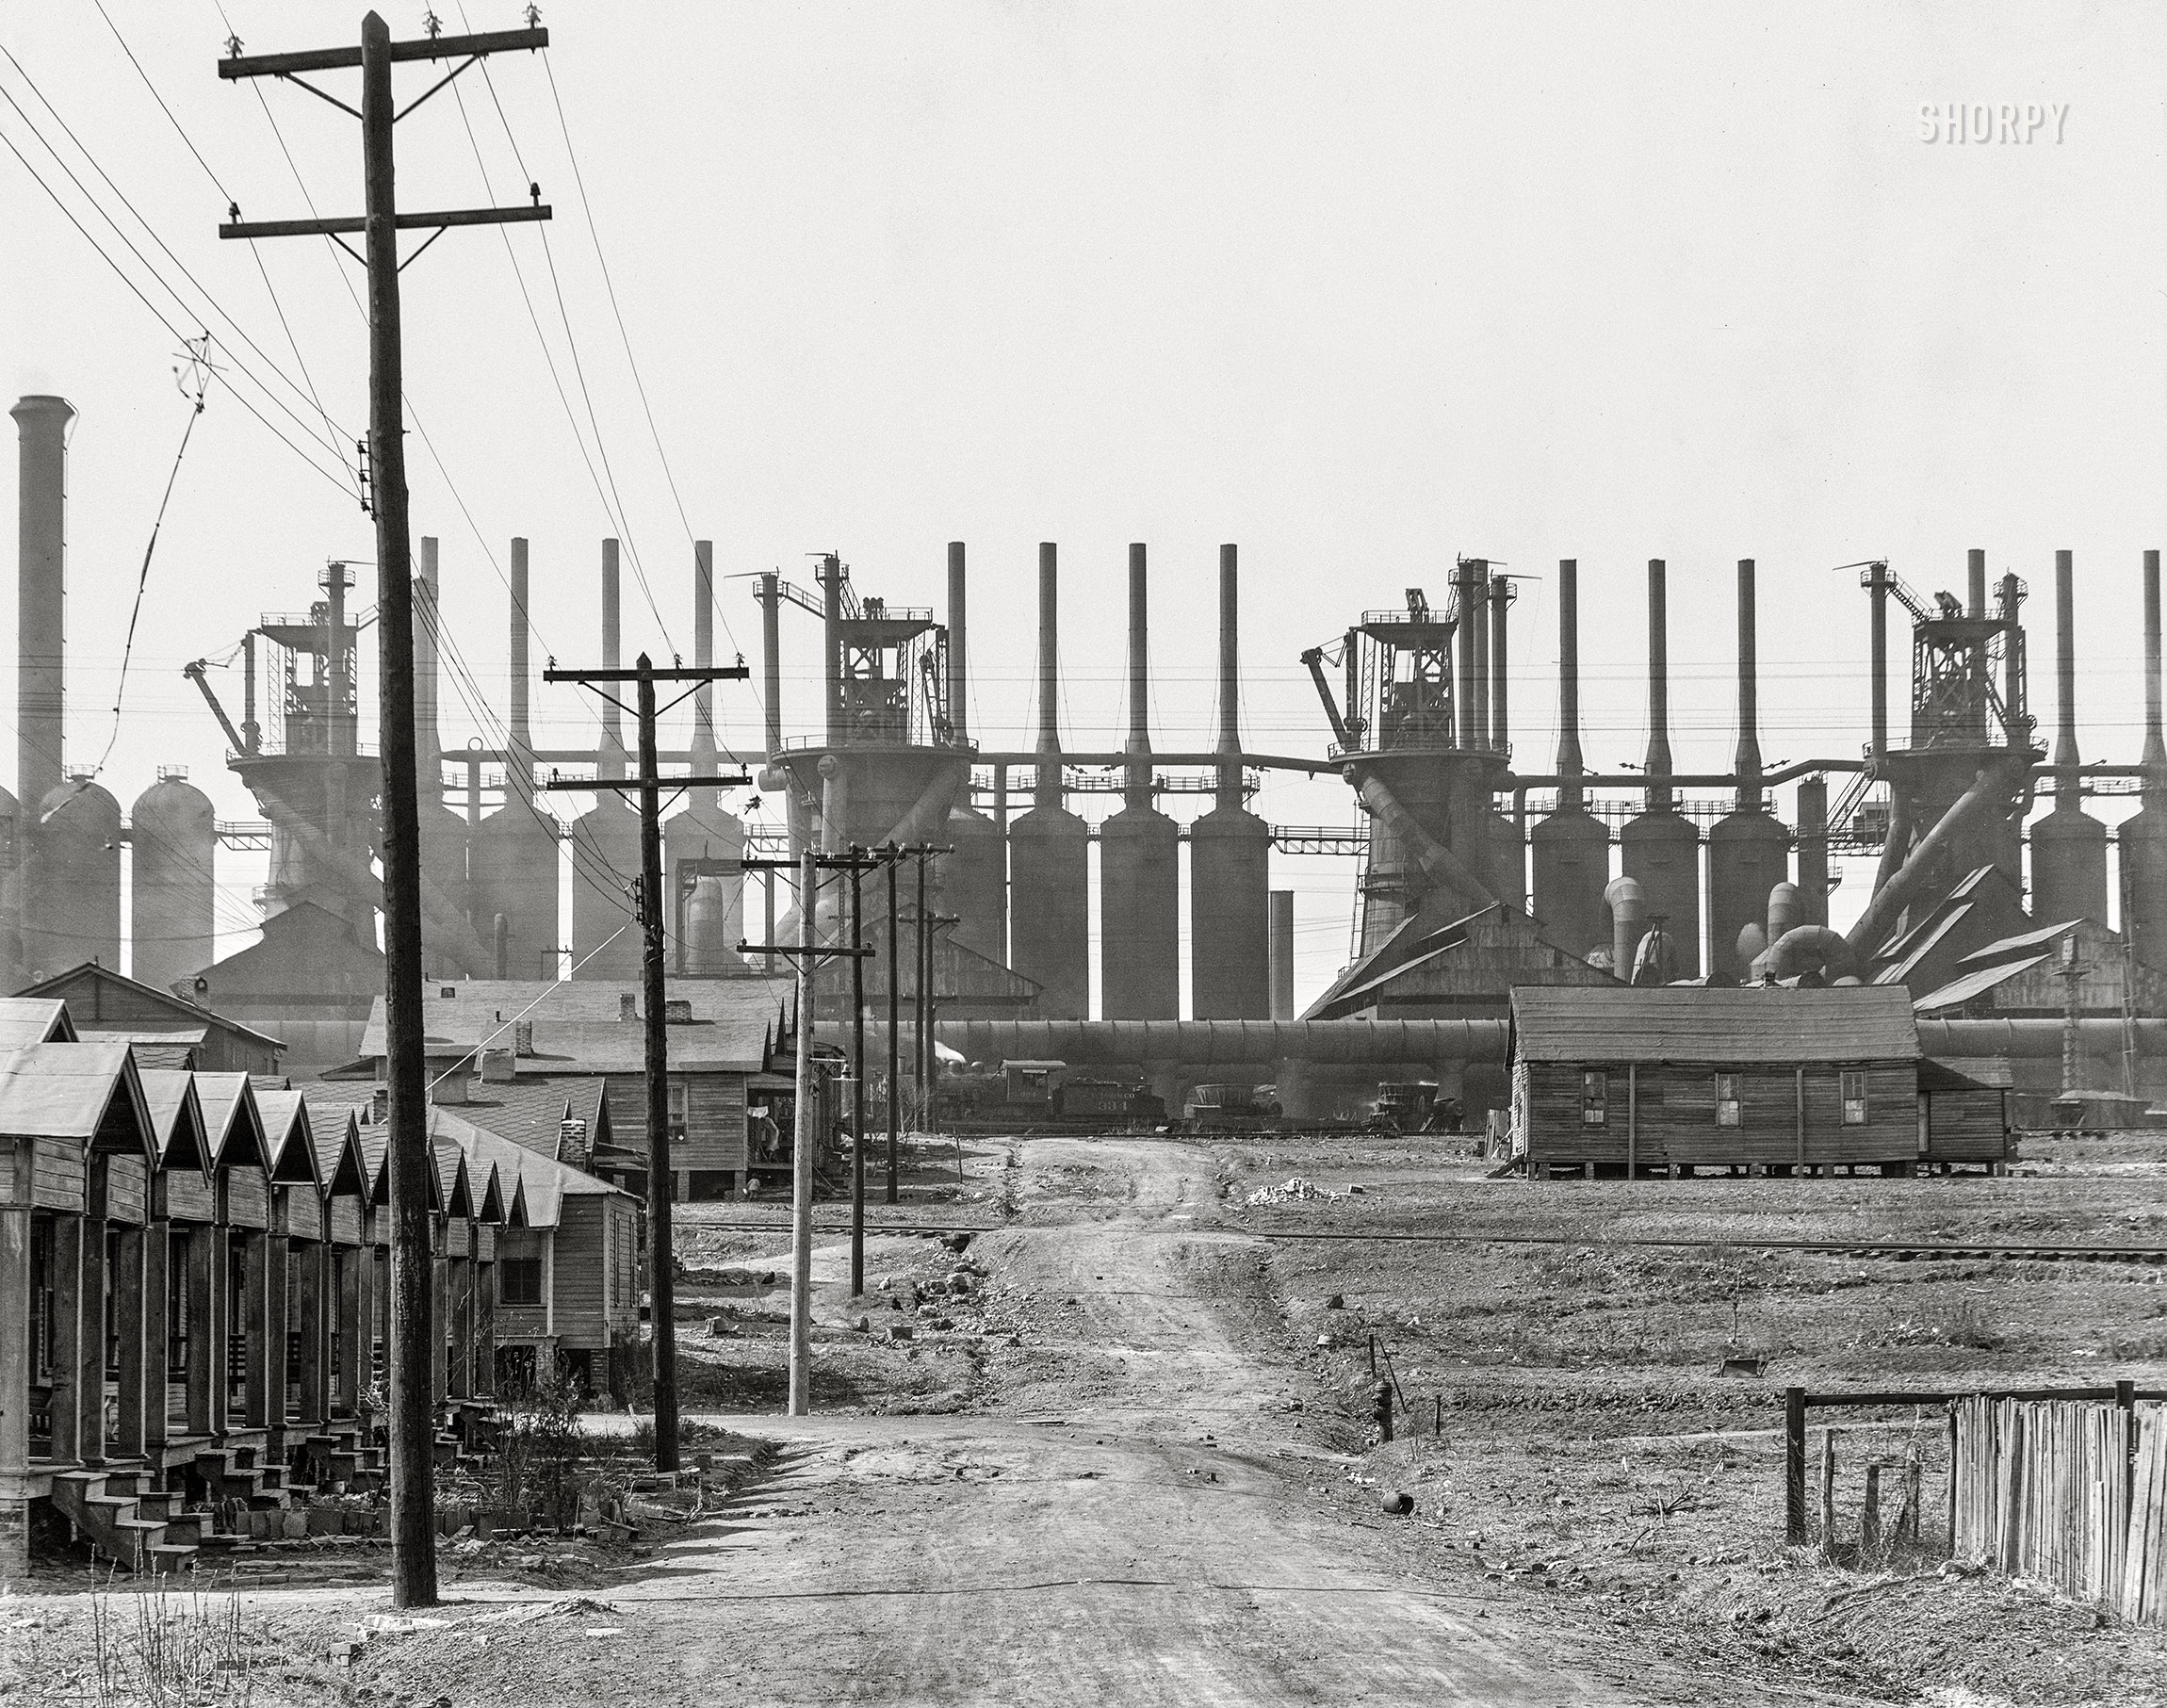 March 1936. "Steel mill and company houses -- Birmingham, Alabama." The Ensley works of the Tennessee Coal, Iron & Railroad Company, along with the skeleton of a snagged kite. 8x10 inch nitrate negative by Walker Evans for the U.S. Resettlement Administration. View full size.